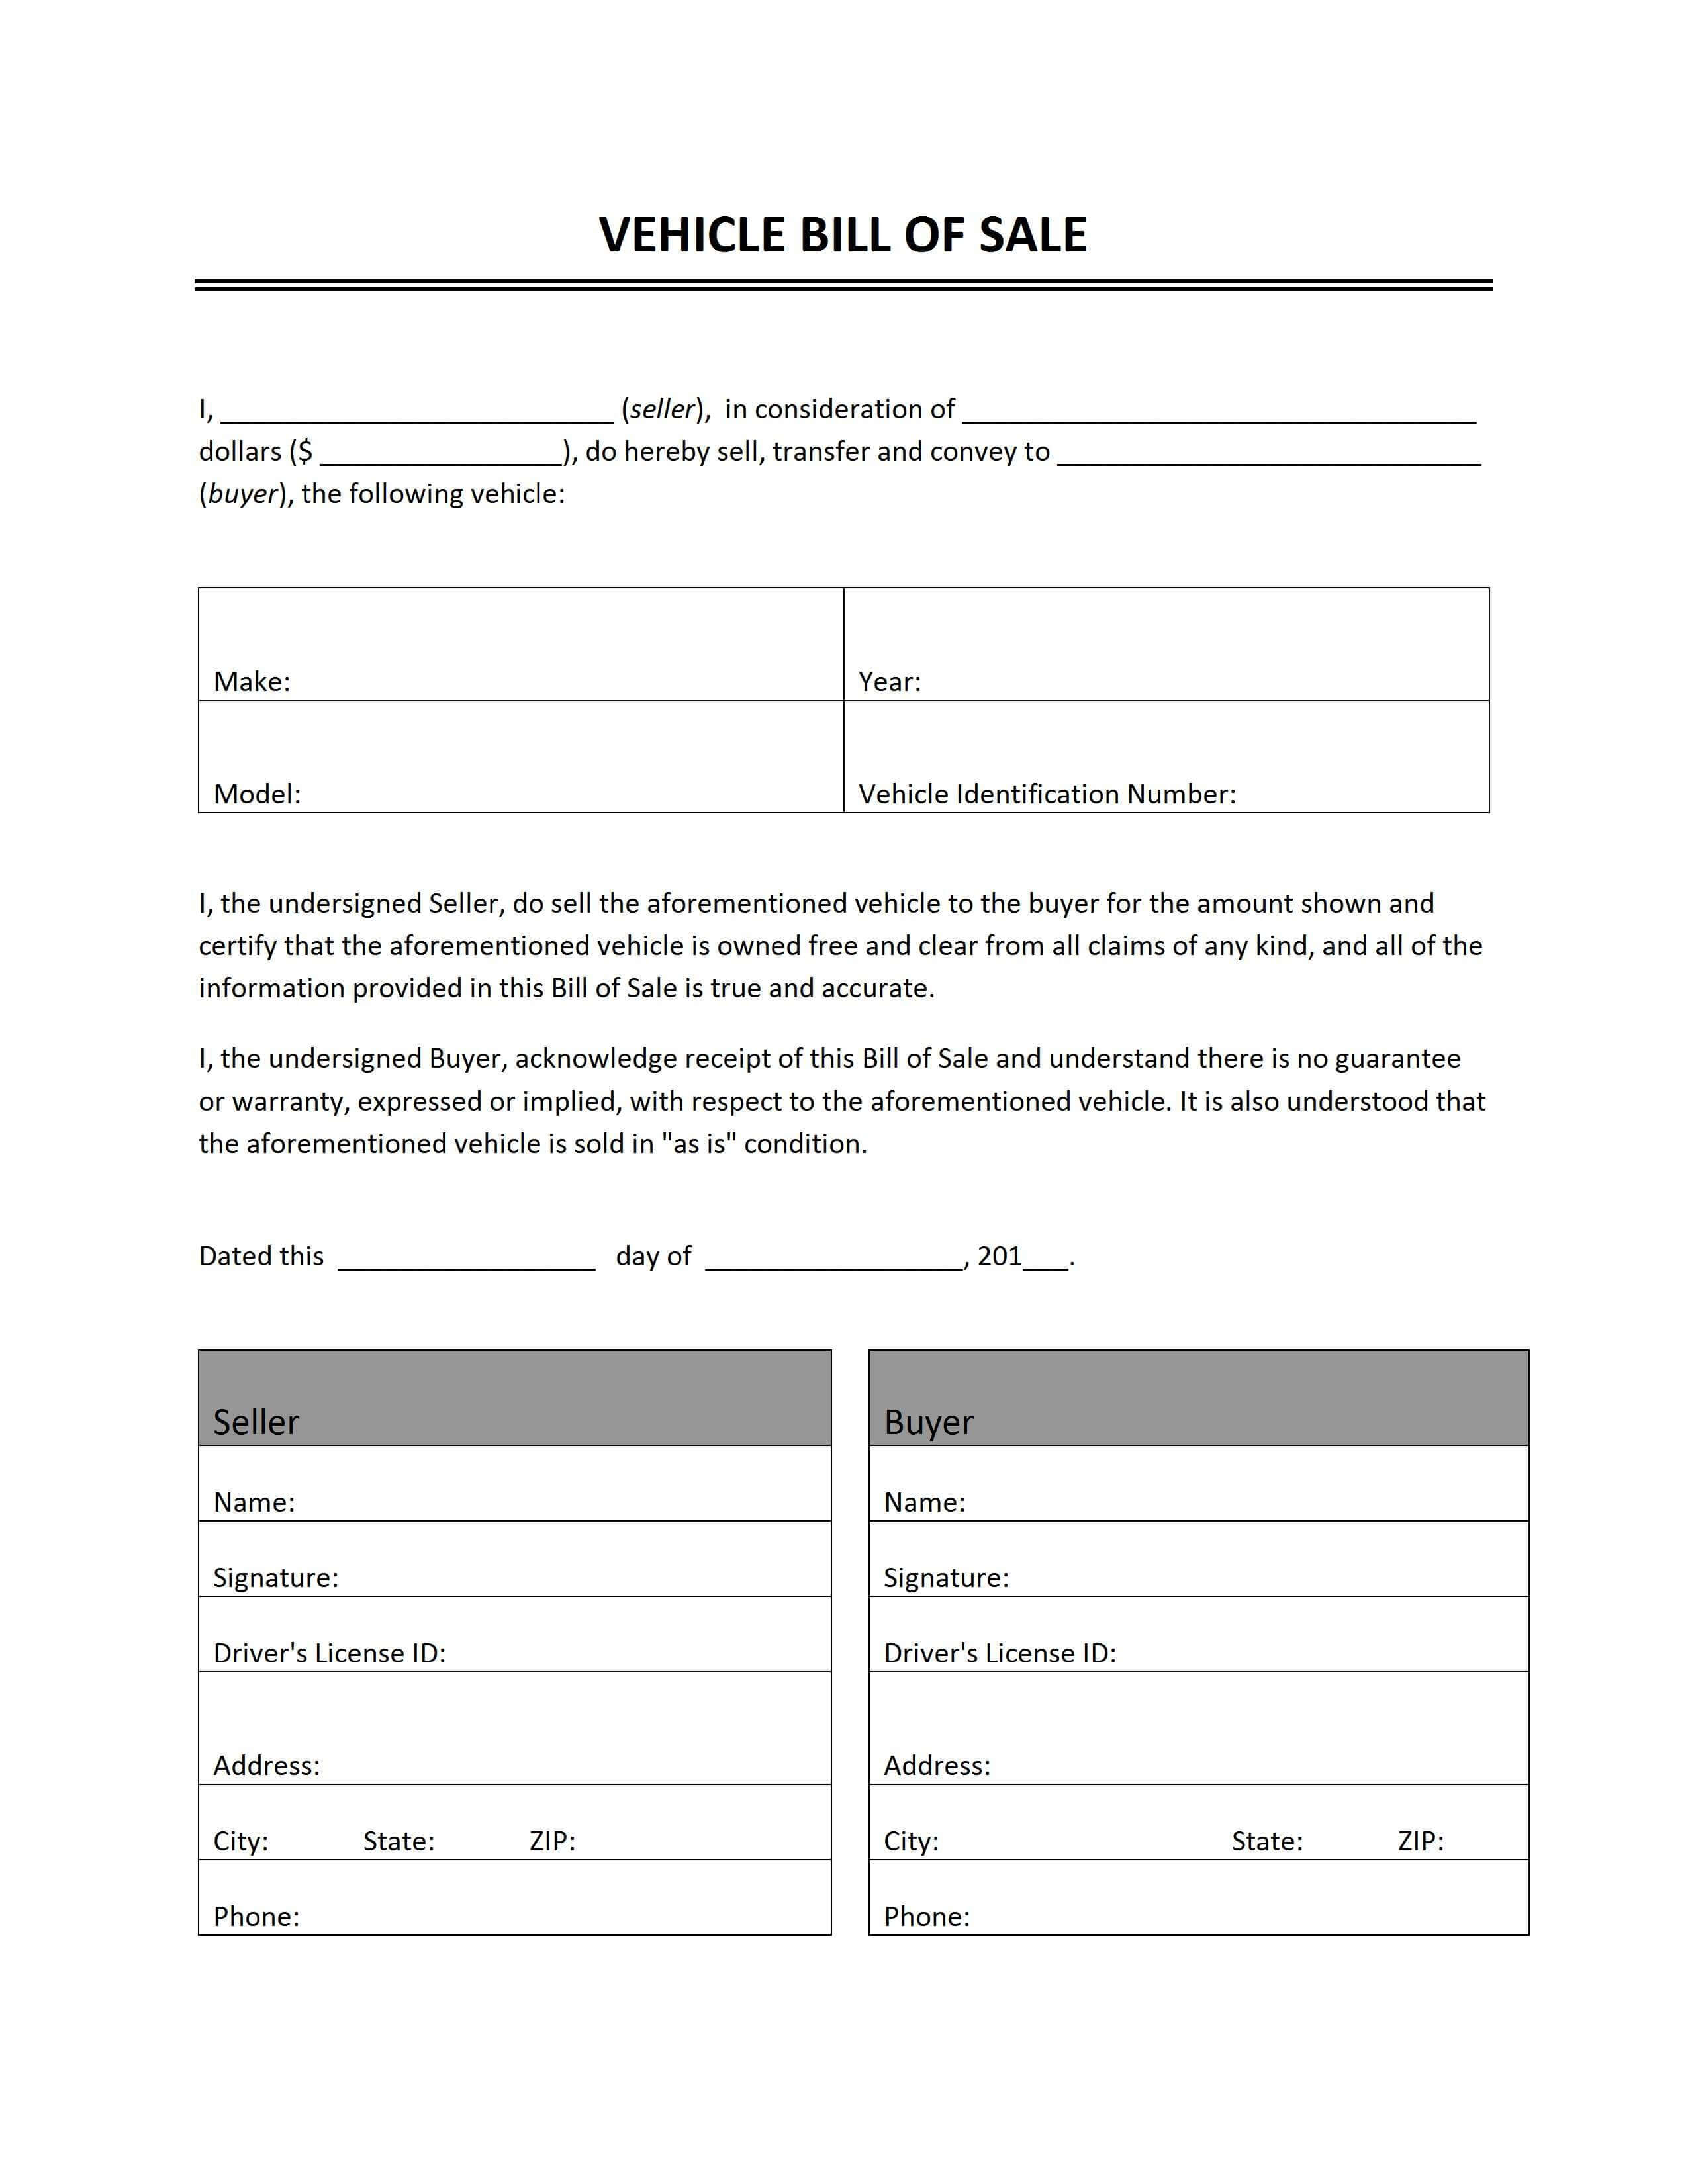 Vehicle Bill Of Sale | Word Templates | Free Word Templates Regarding Car Bill Of Sale Word Template